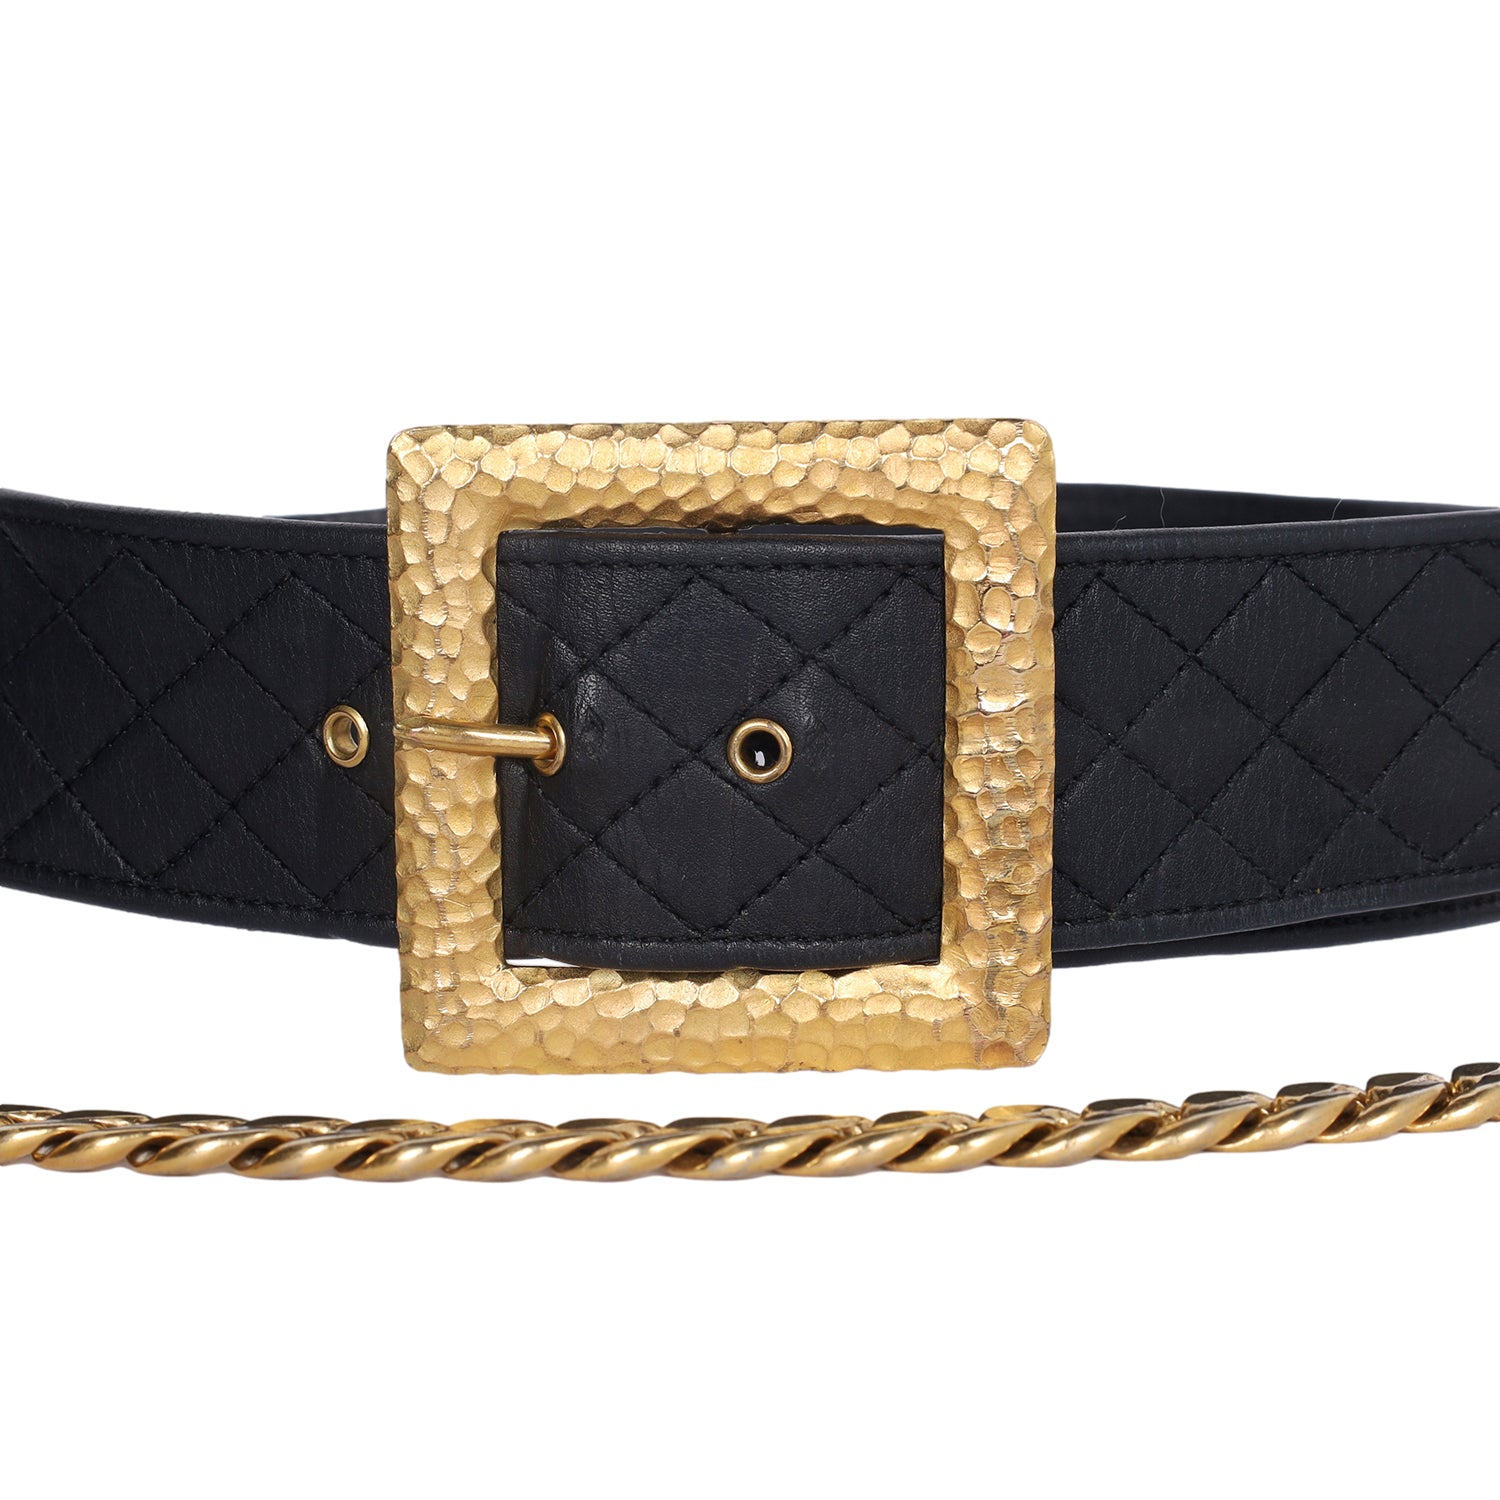 BN AUTHENTIC CHANEL PEARL CRUSH BELT BAG IN LIGHT GREEN LAMBSKIN LEATHER  WITH ANTIQUE GOLD HARDWARE – Mi Reyna Fashion Lover